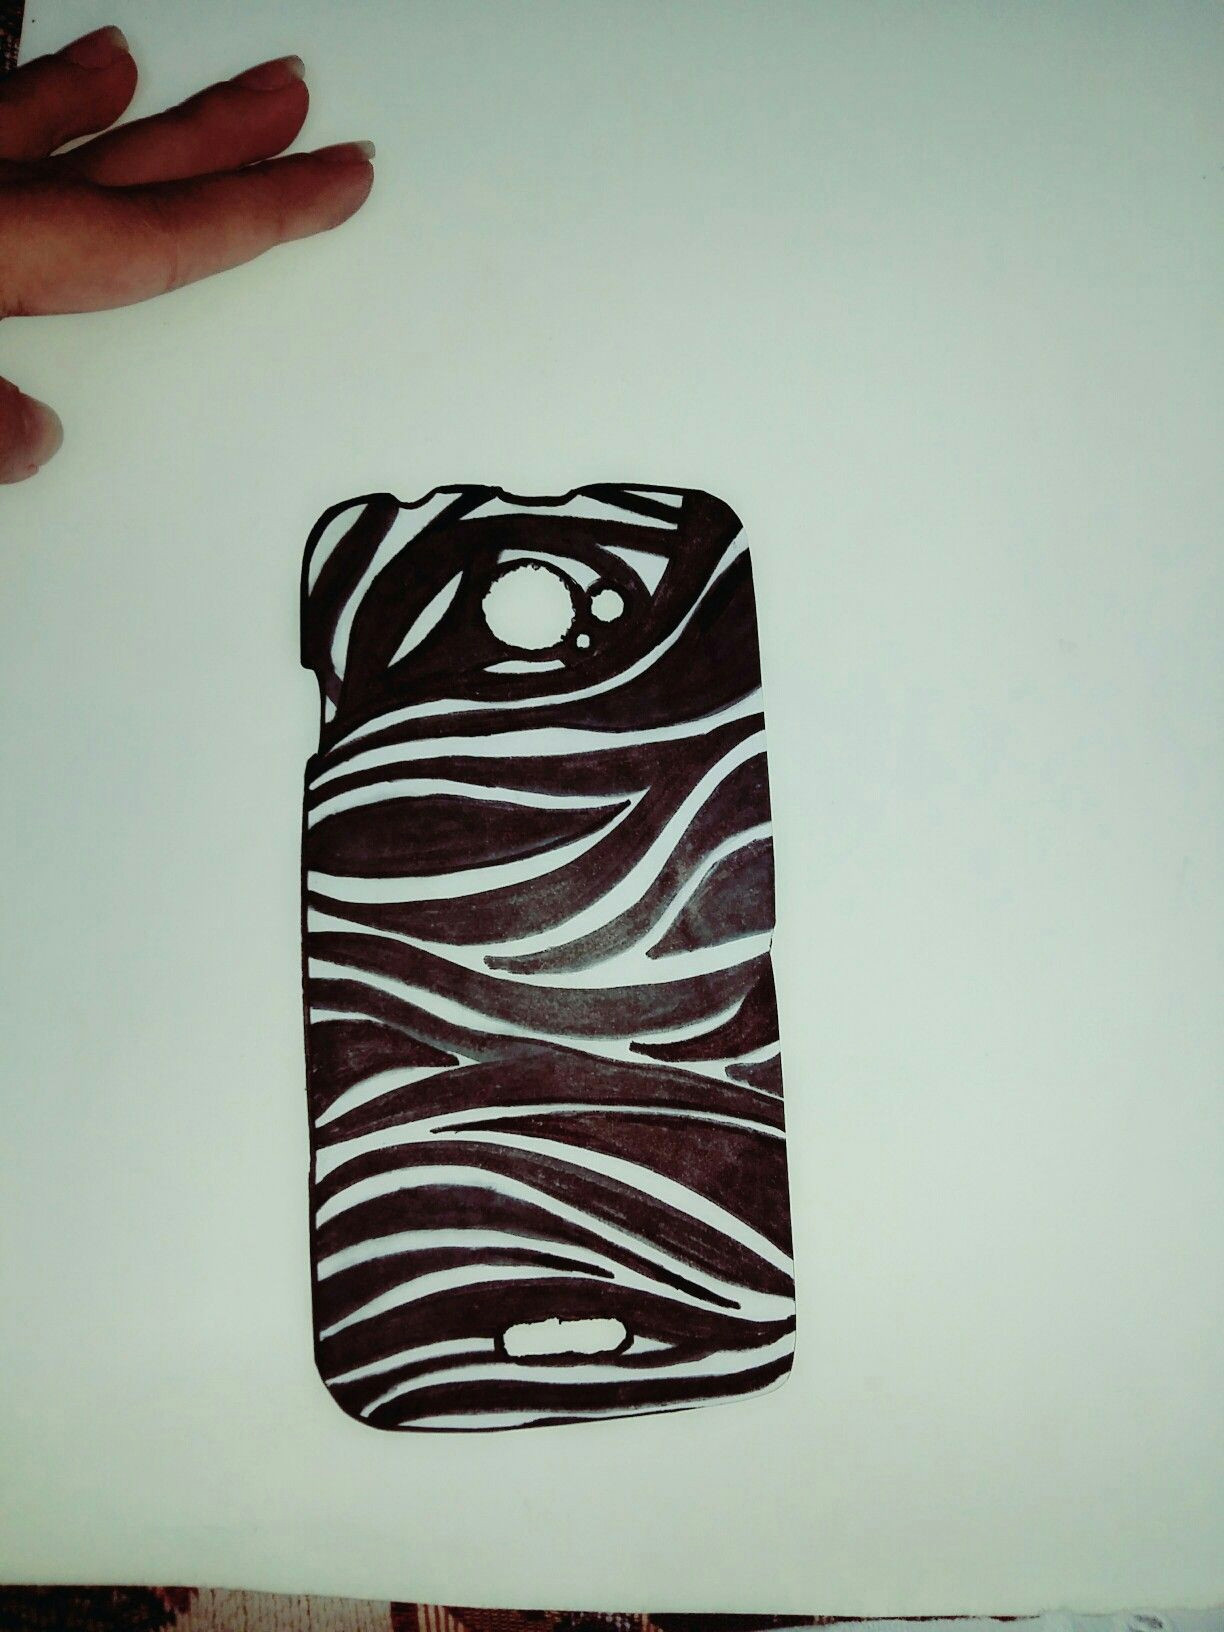 Phone Case Drawing Ideas Just Draw It It and Place It In Transparent Mobile Case